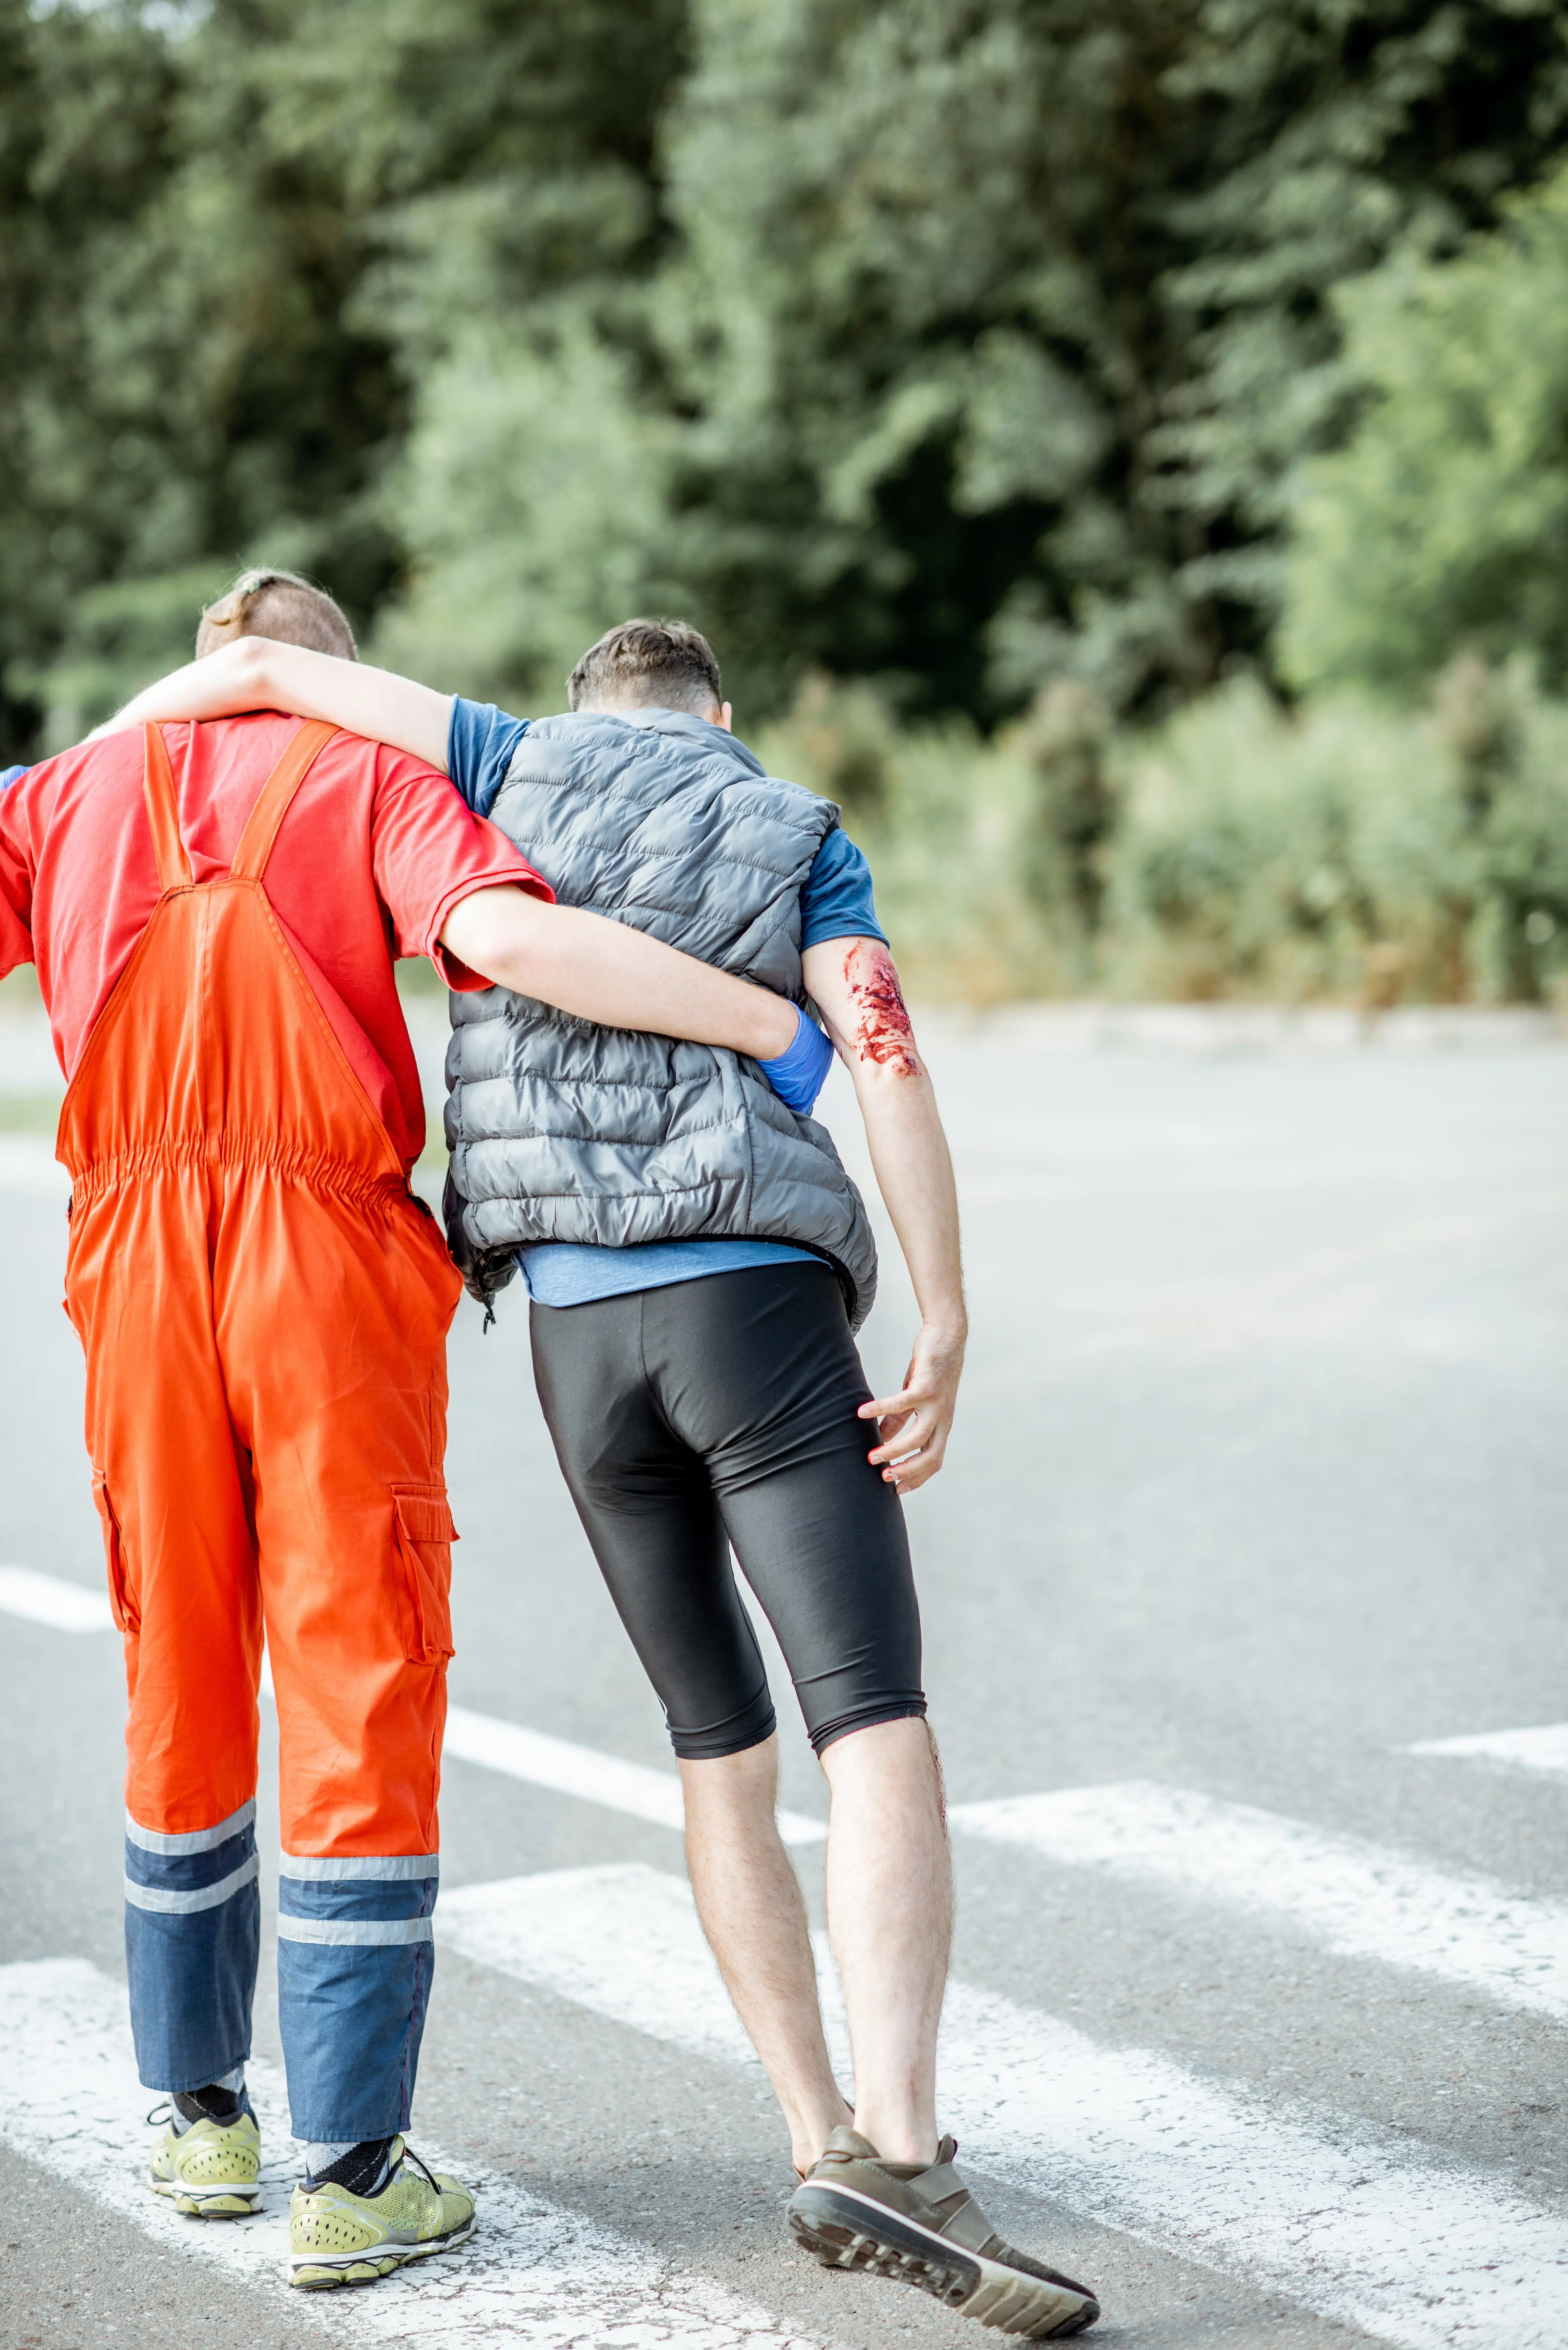 Medic walking with injured man after the accident